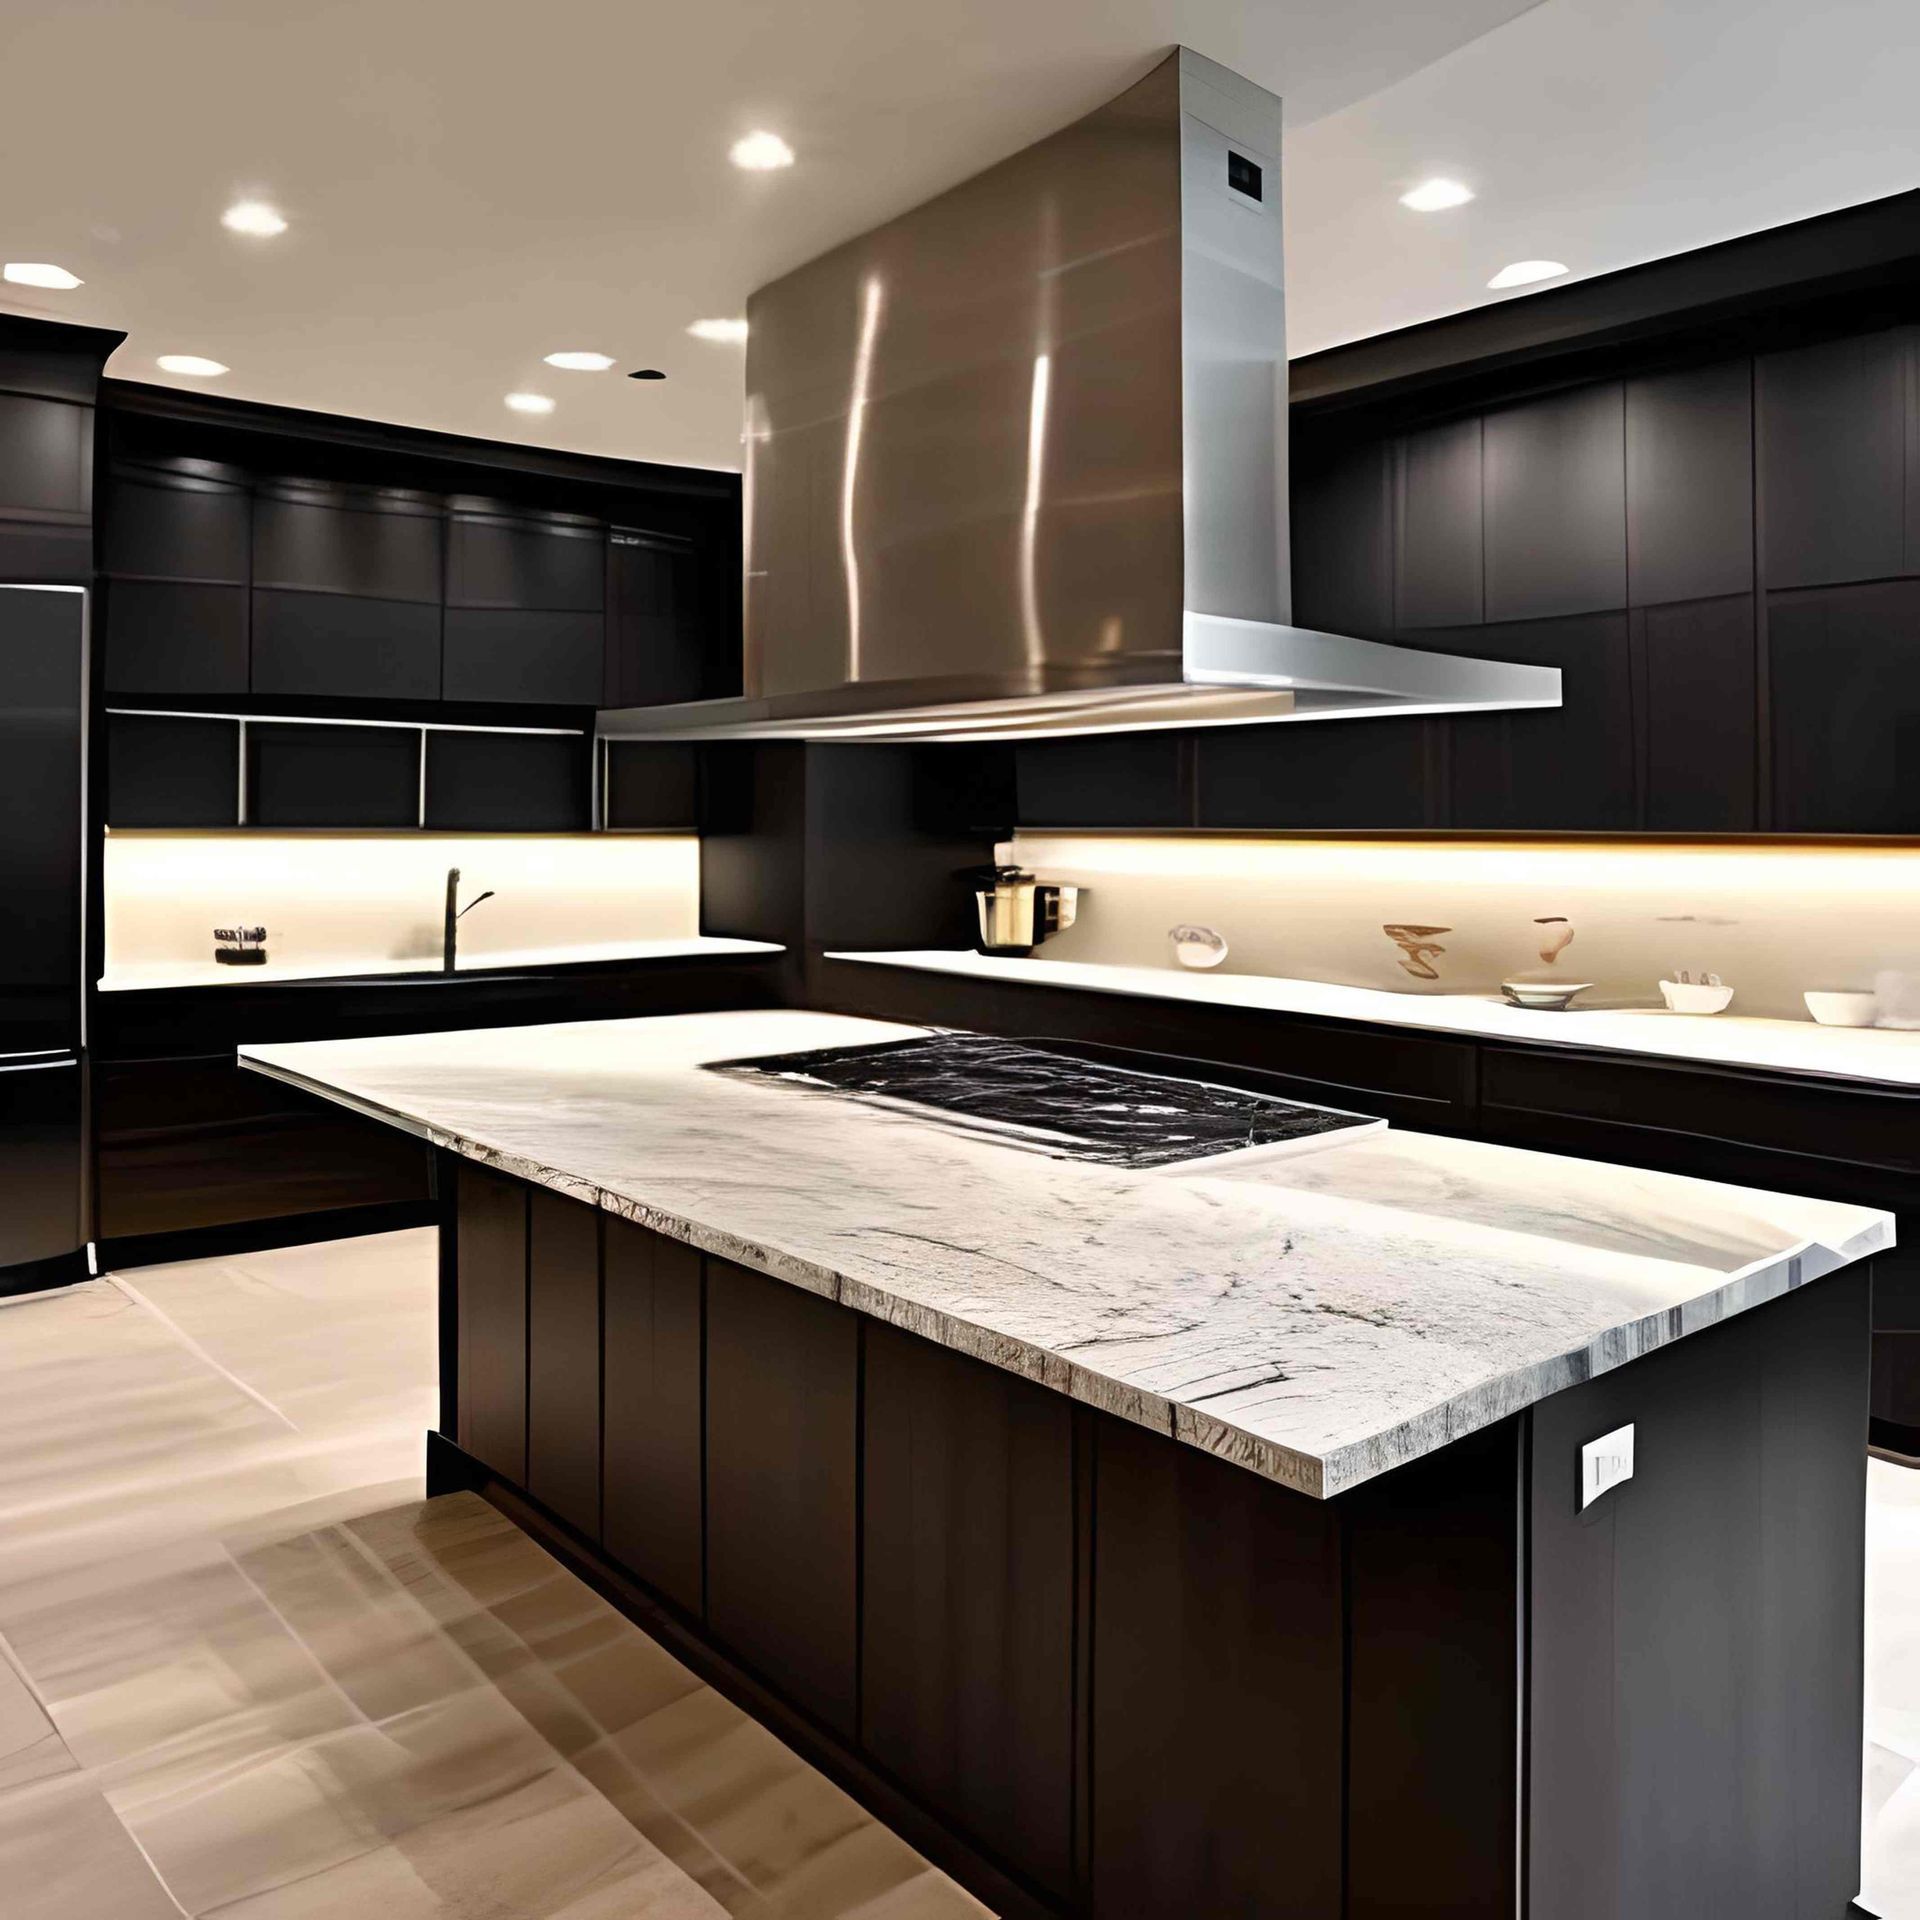 Dark colored black kitchen cabinets installed in a home